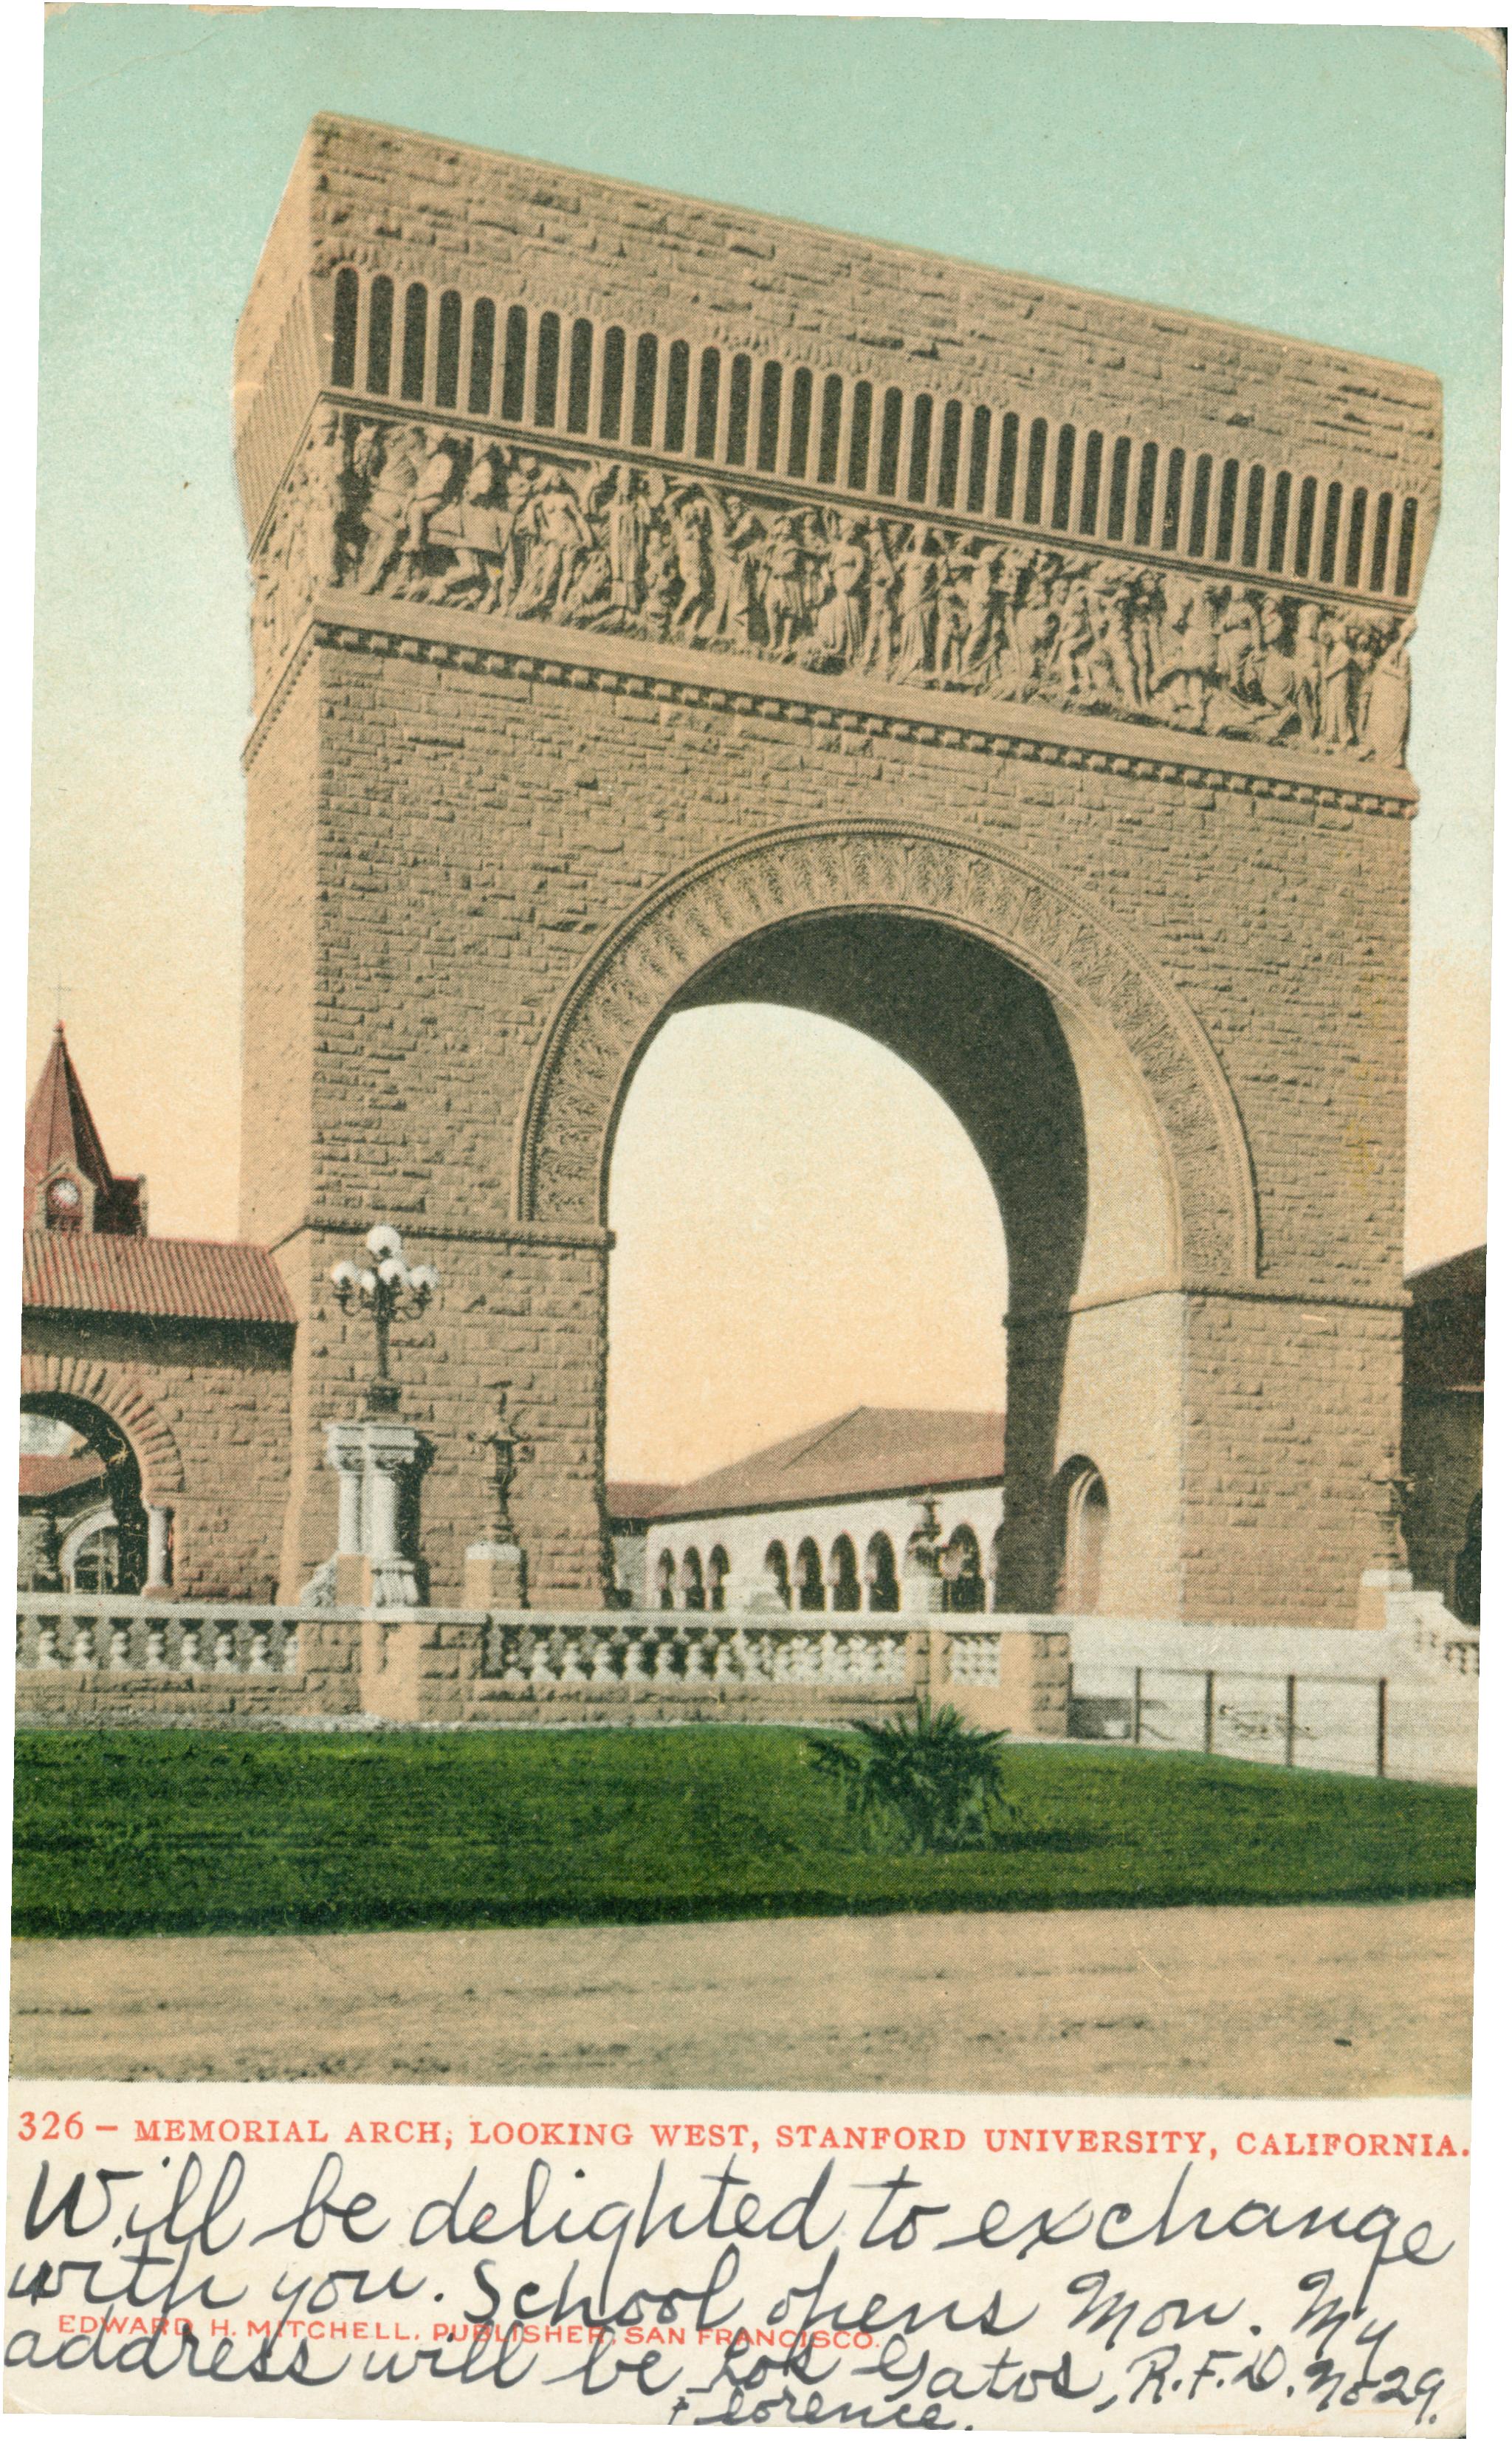 View of Memorial Arch in the Stanford University Quad